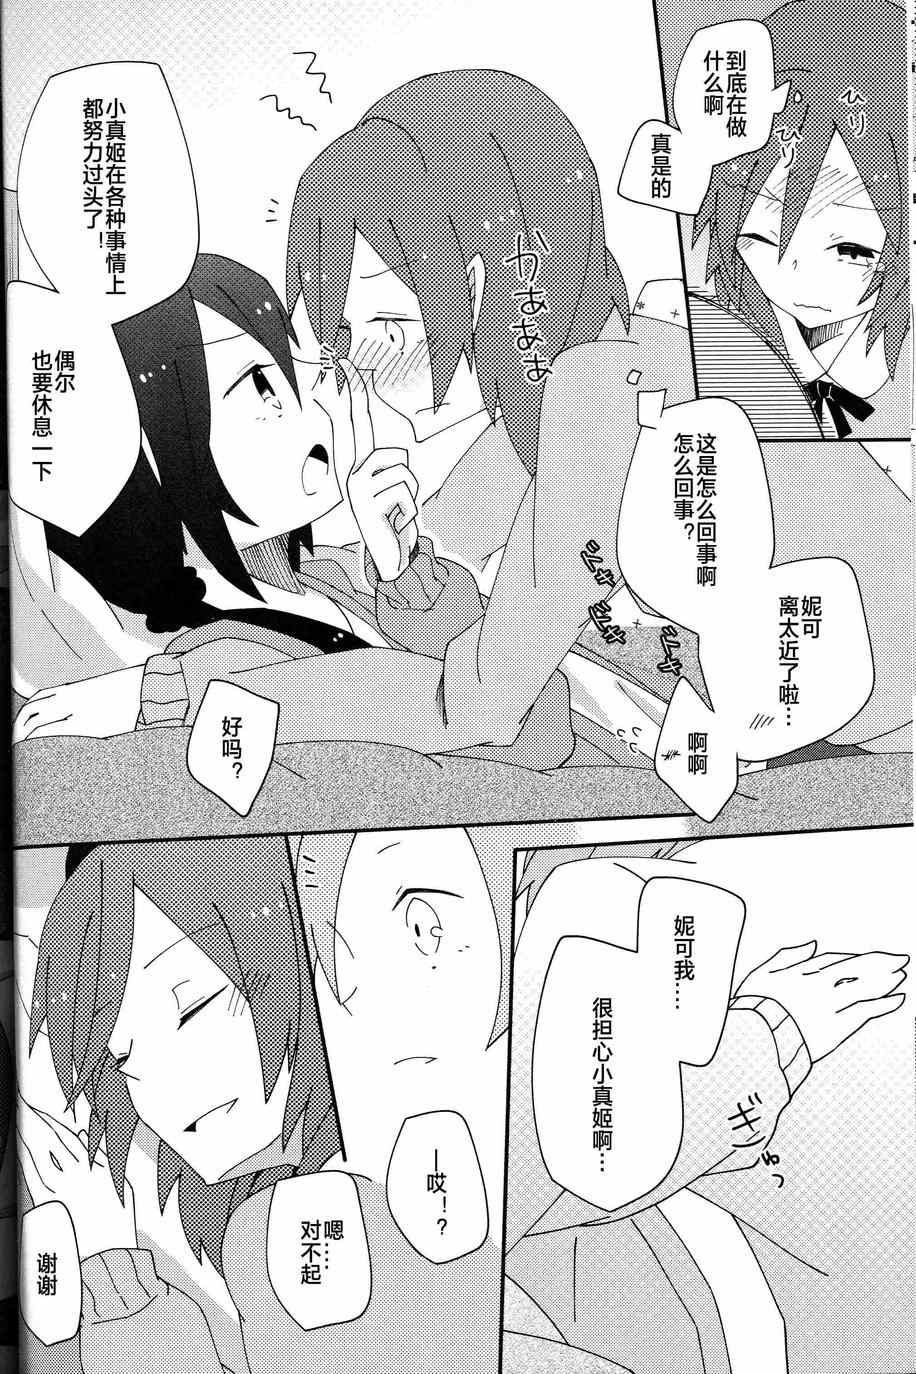 《LoveLive》漫画 I m in love with you